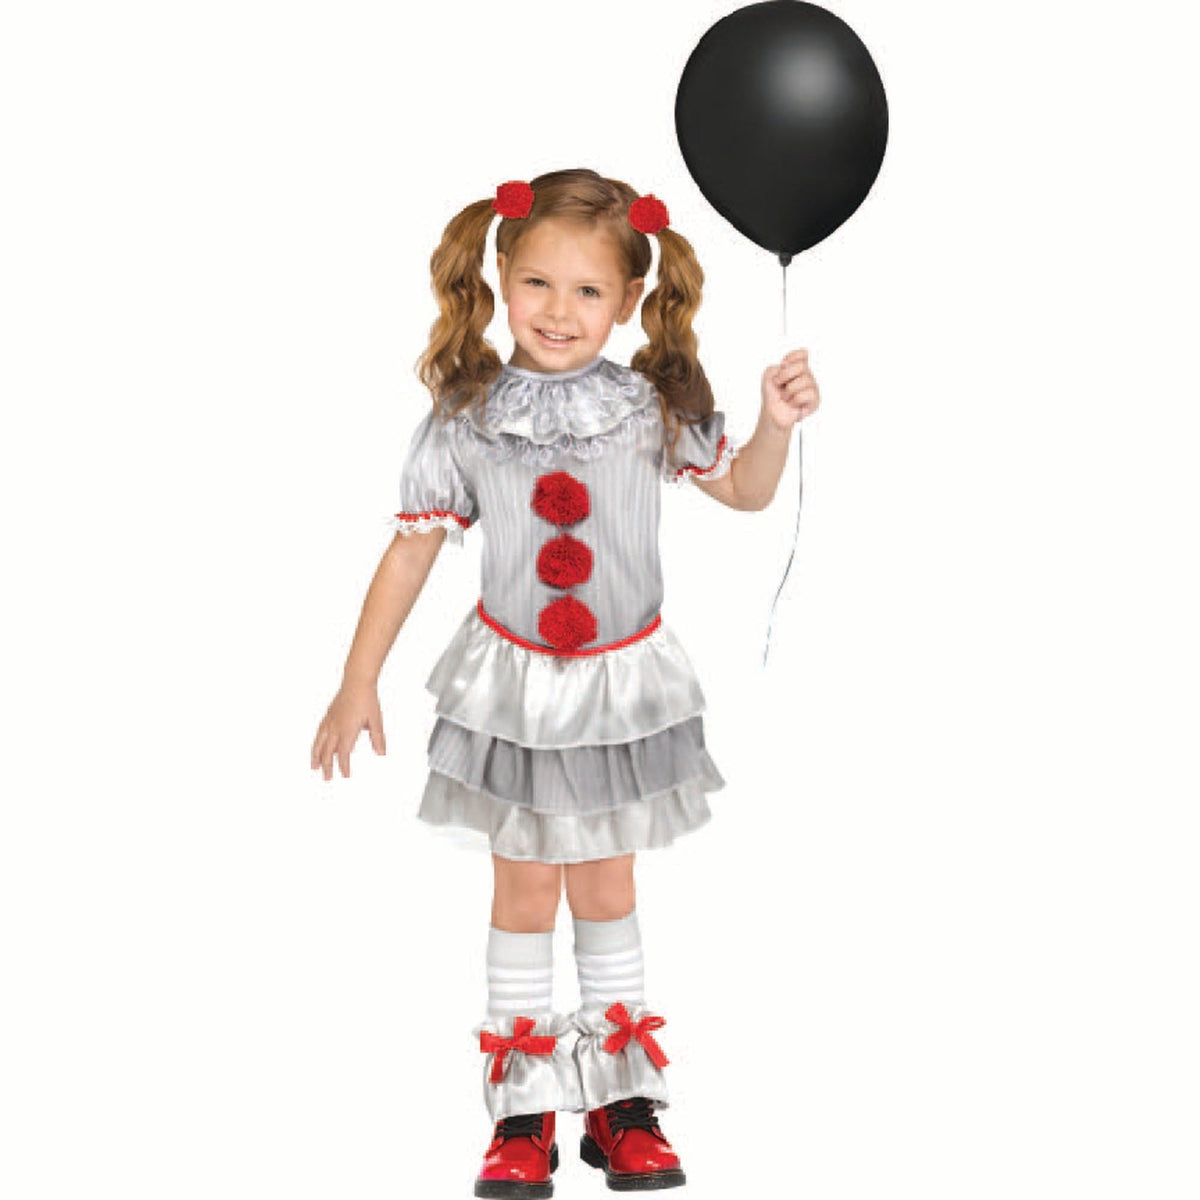 FUN WORLD Costumes Carnevil Clown Costume for Toddlers, Grey and Red Dress